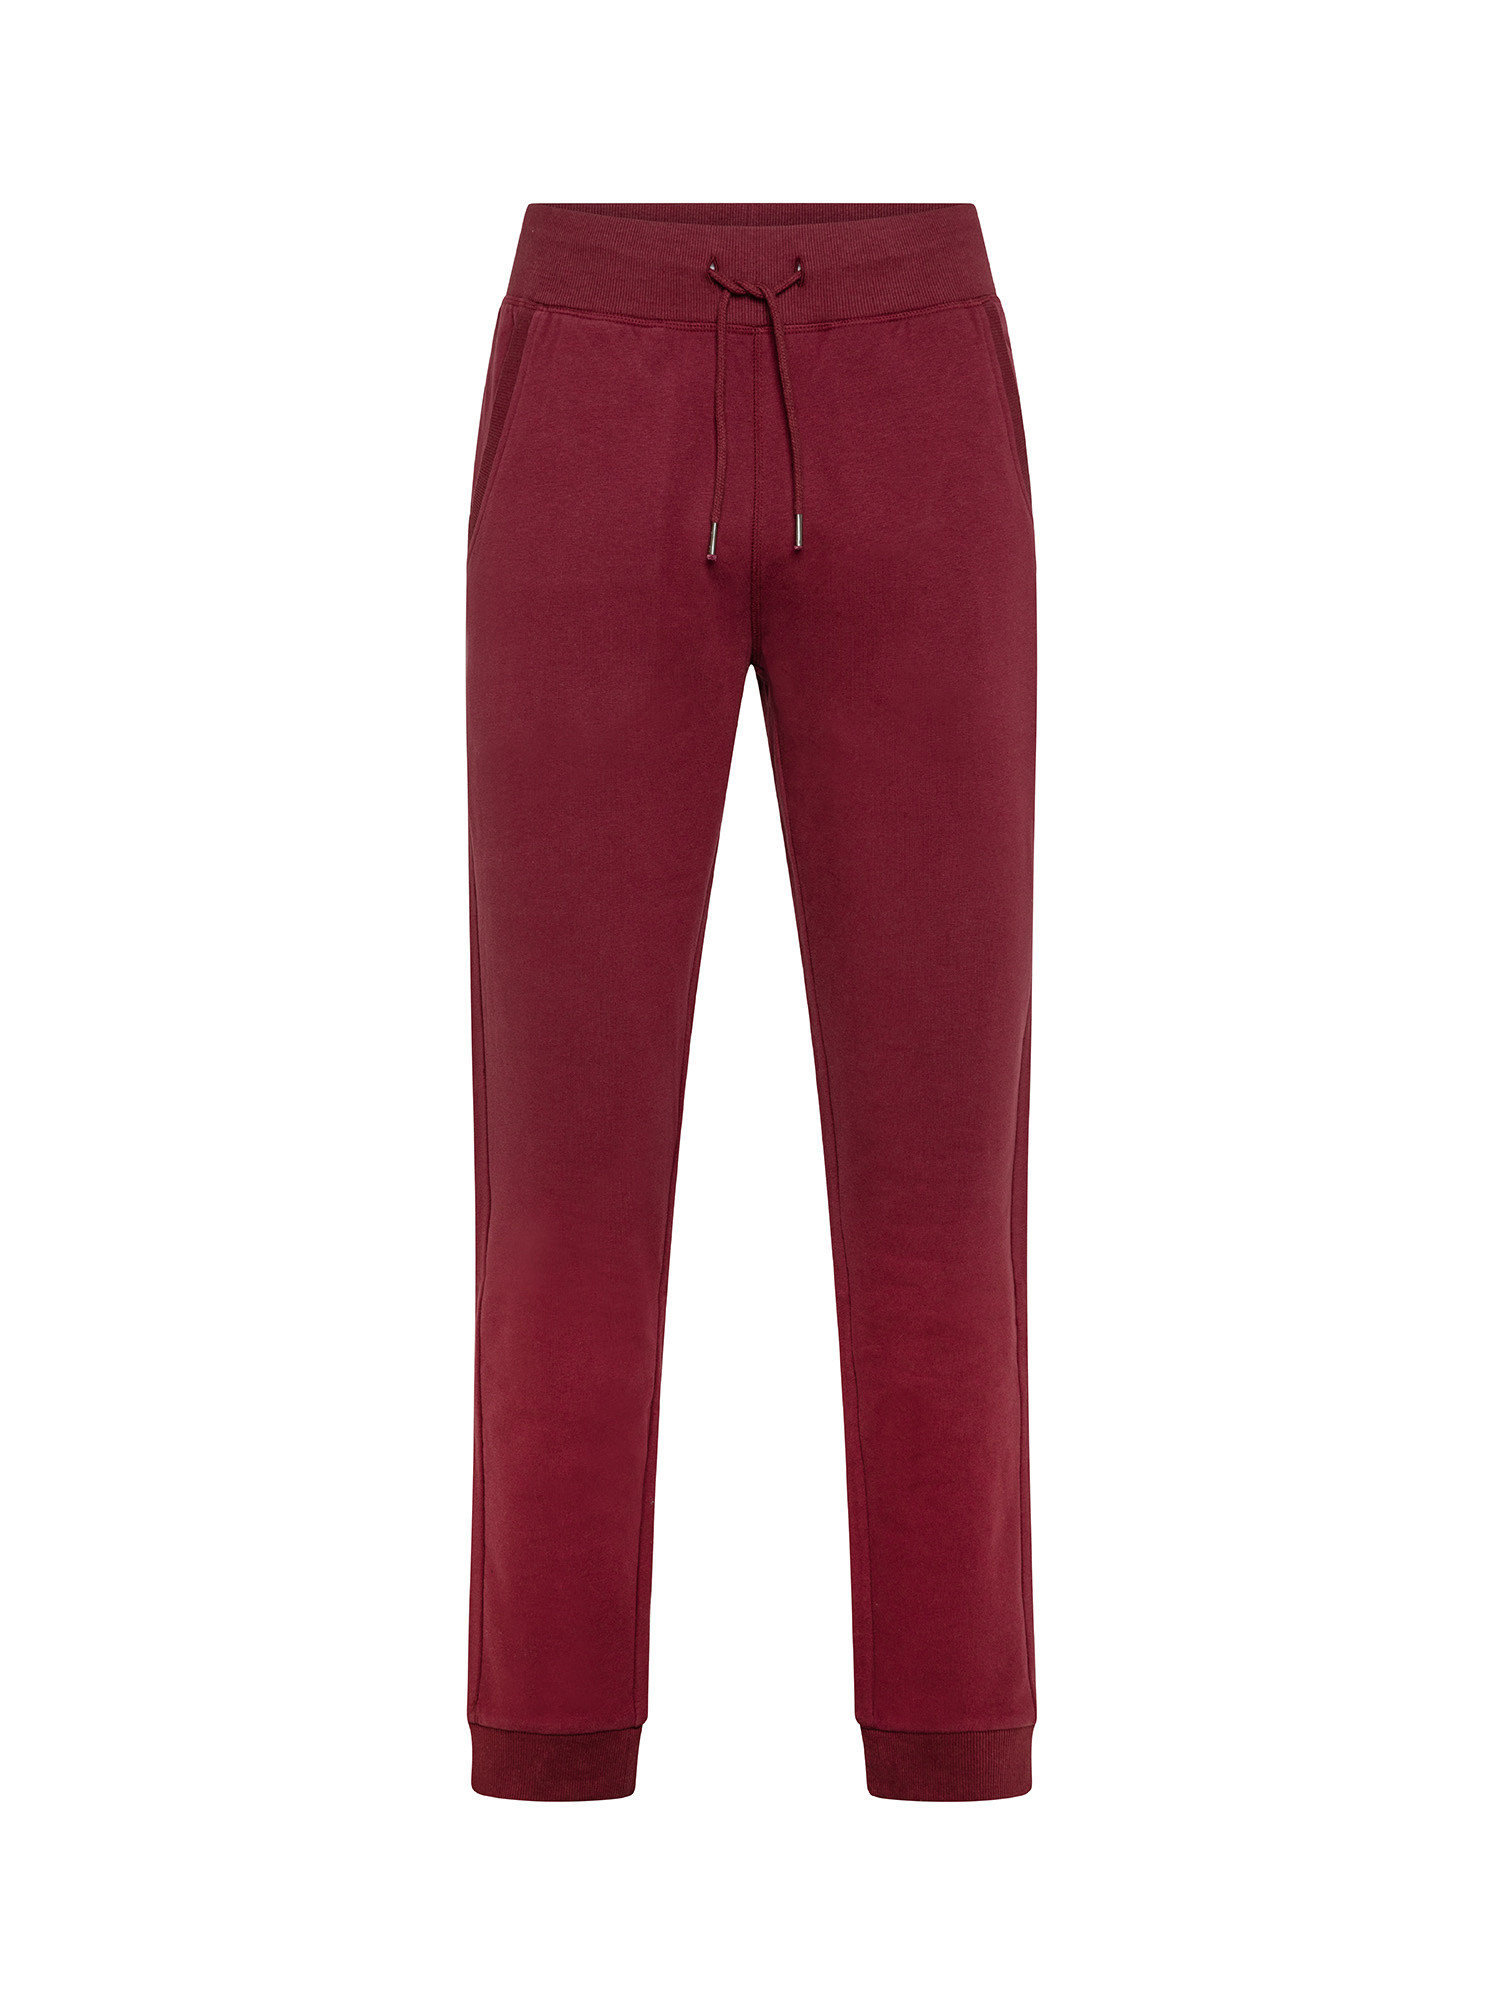 JCT - Soft touch five-pocket trousers, Red Bordeaux, large image number 0